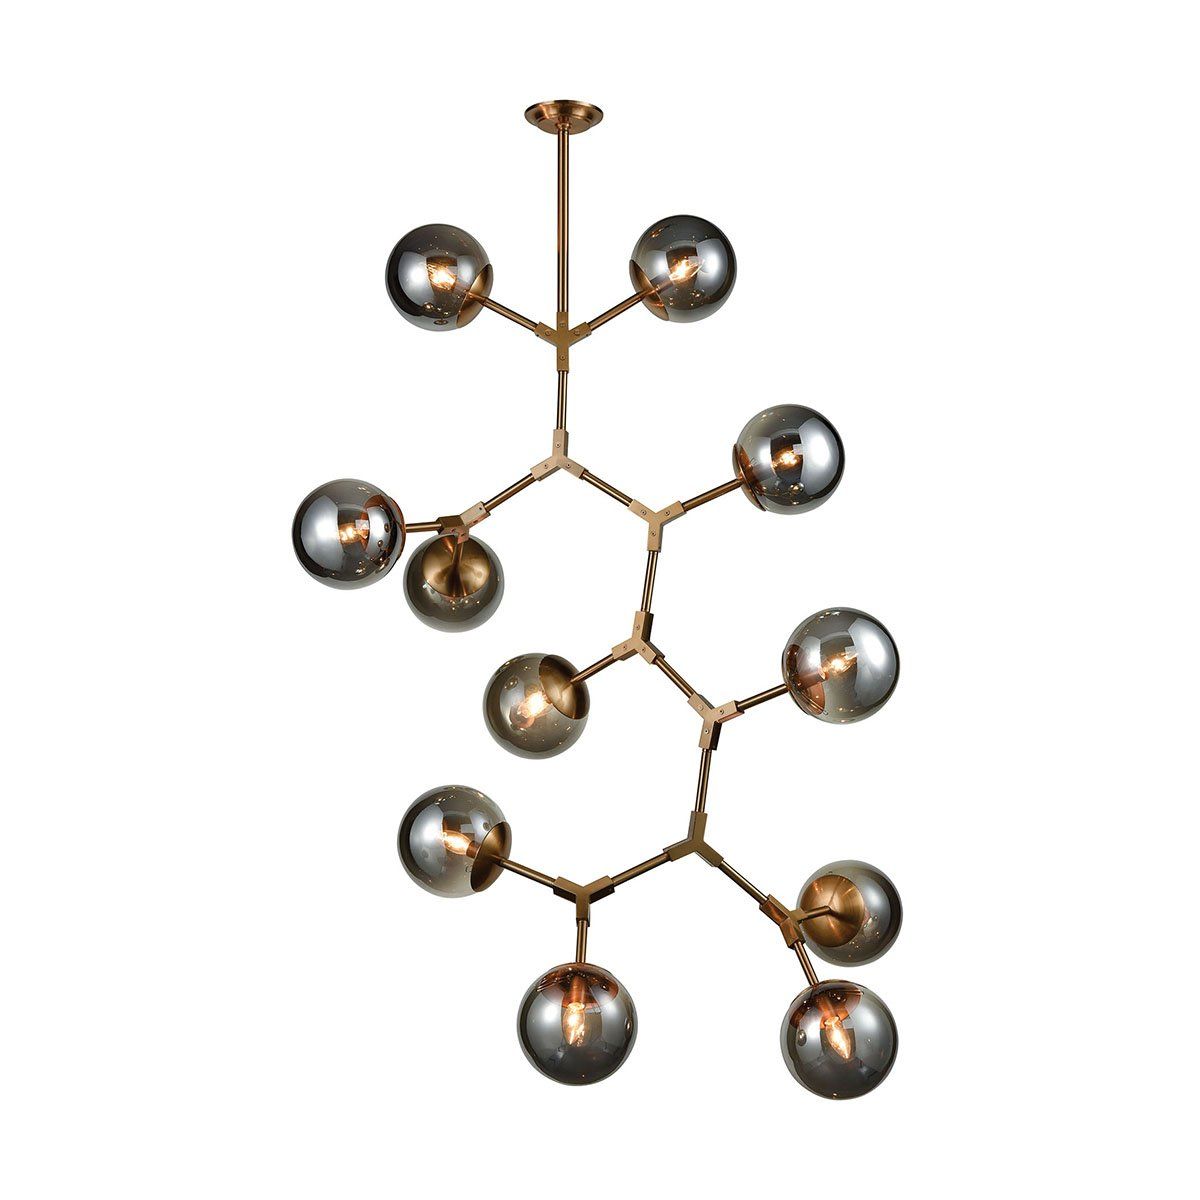 Large Synapse Chandelier Ceiling Dimond Lighting 